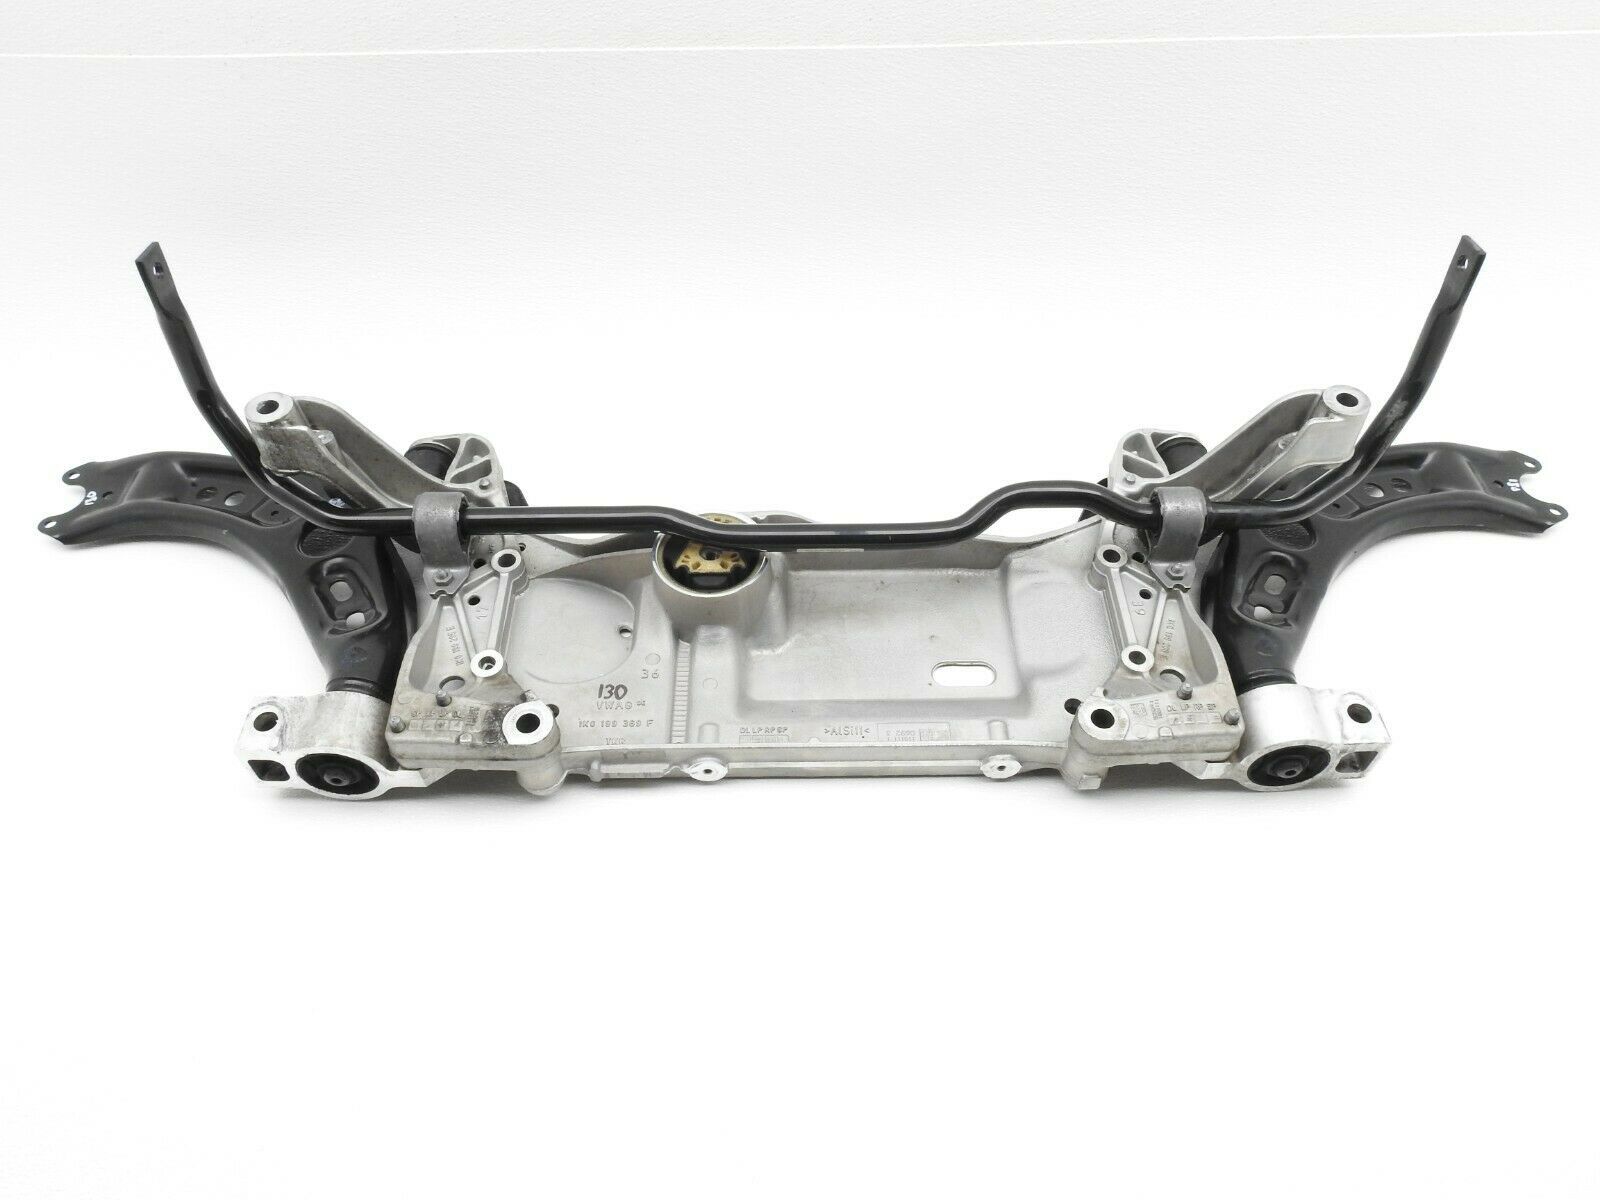 09-16 Vw Eos 2.0T Tsi Front Lower Subframe Engine Cradle Control Arms Assy -130 - $356.40